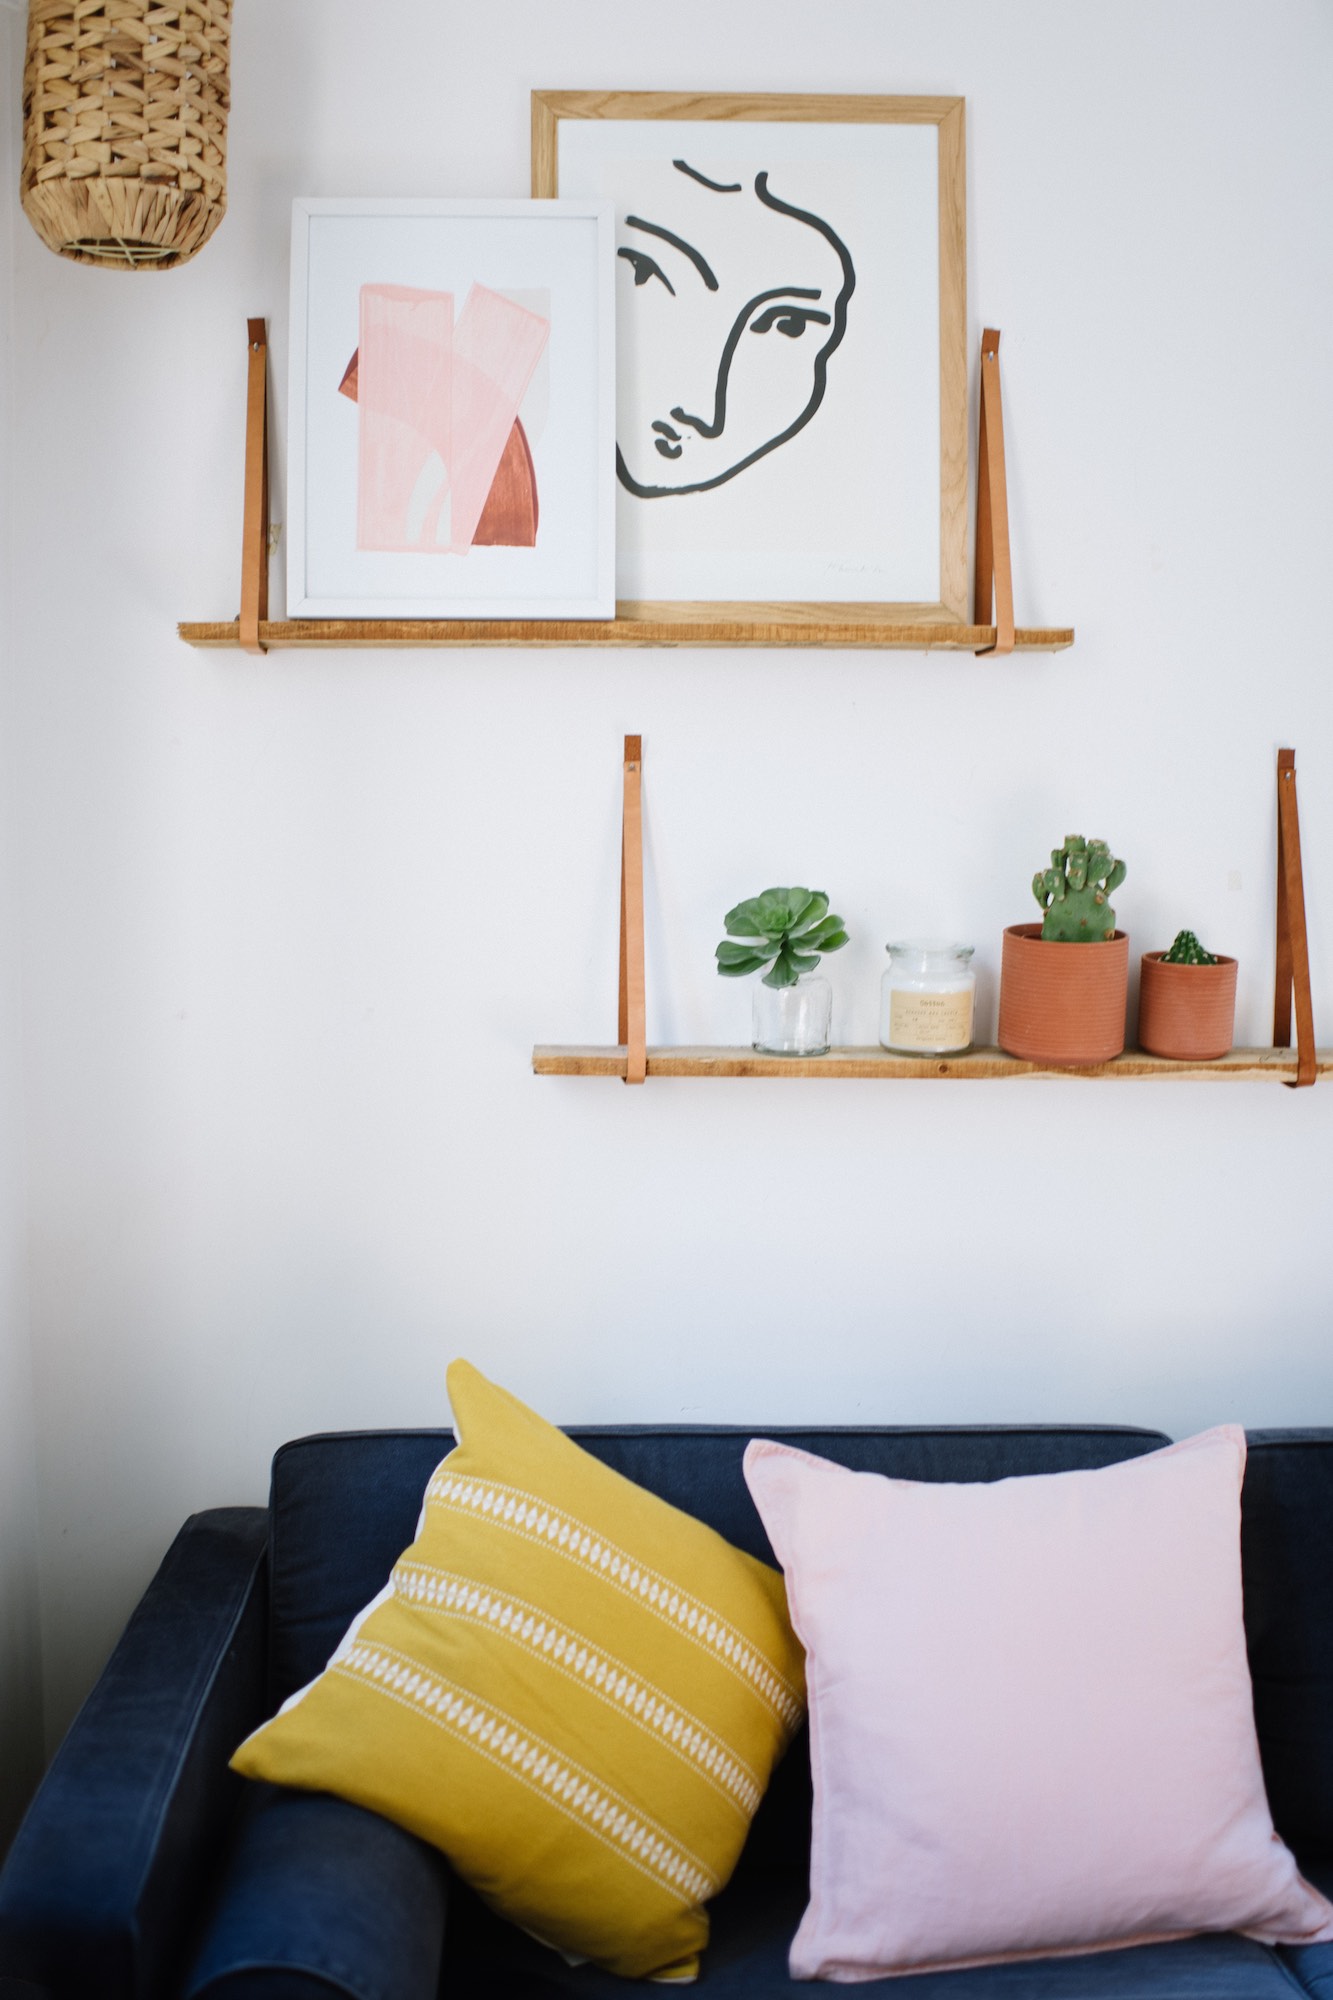 How To Make Your Tiny Living Space Look Huge